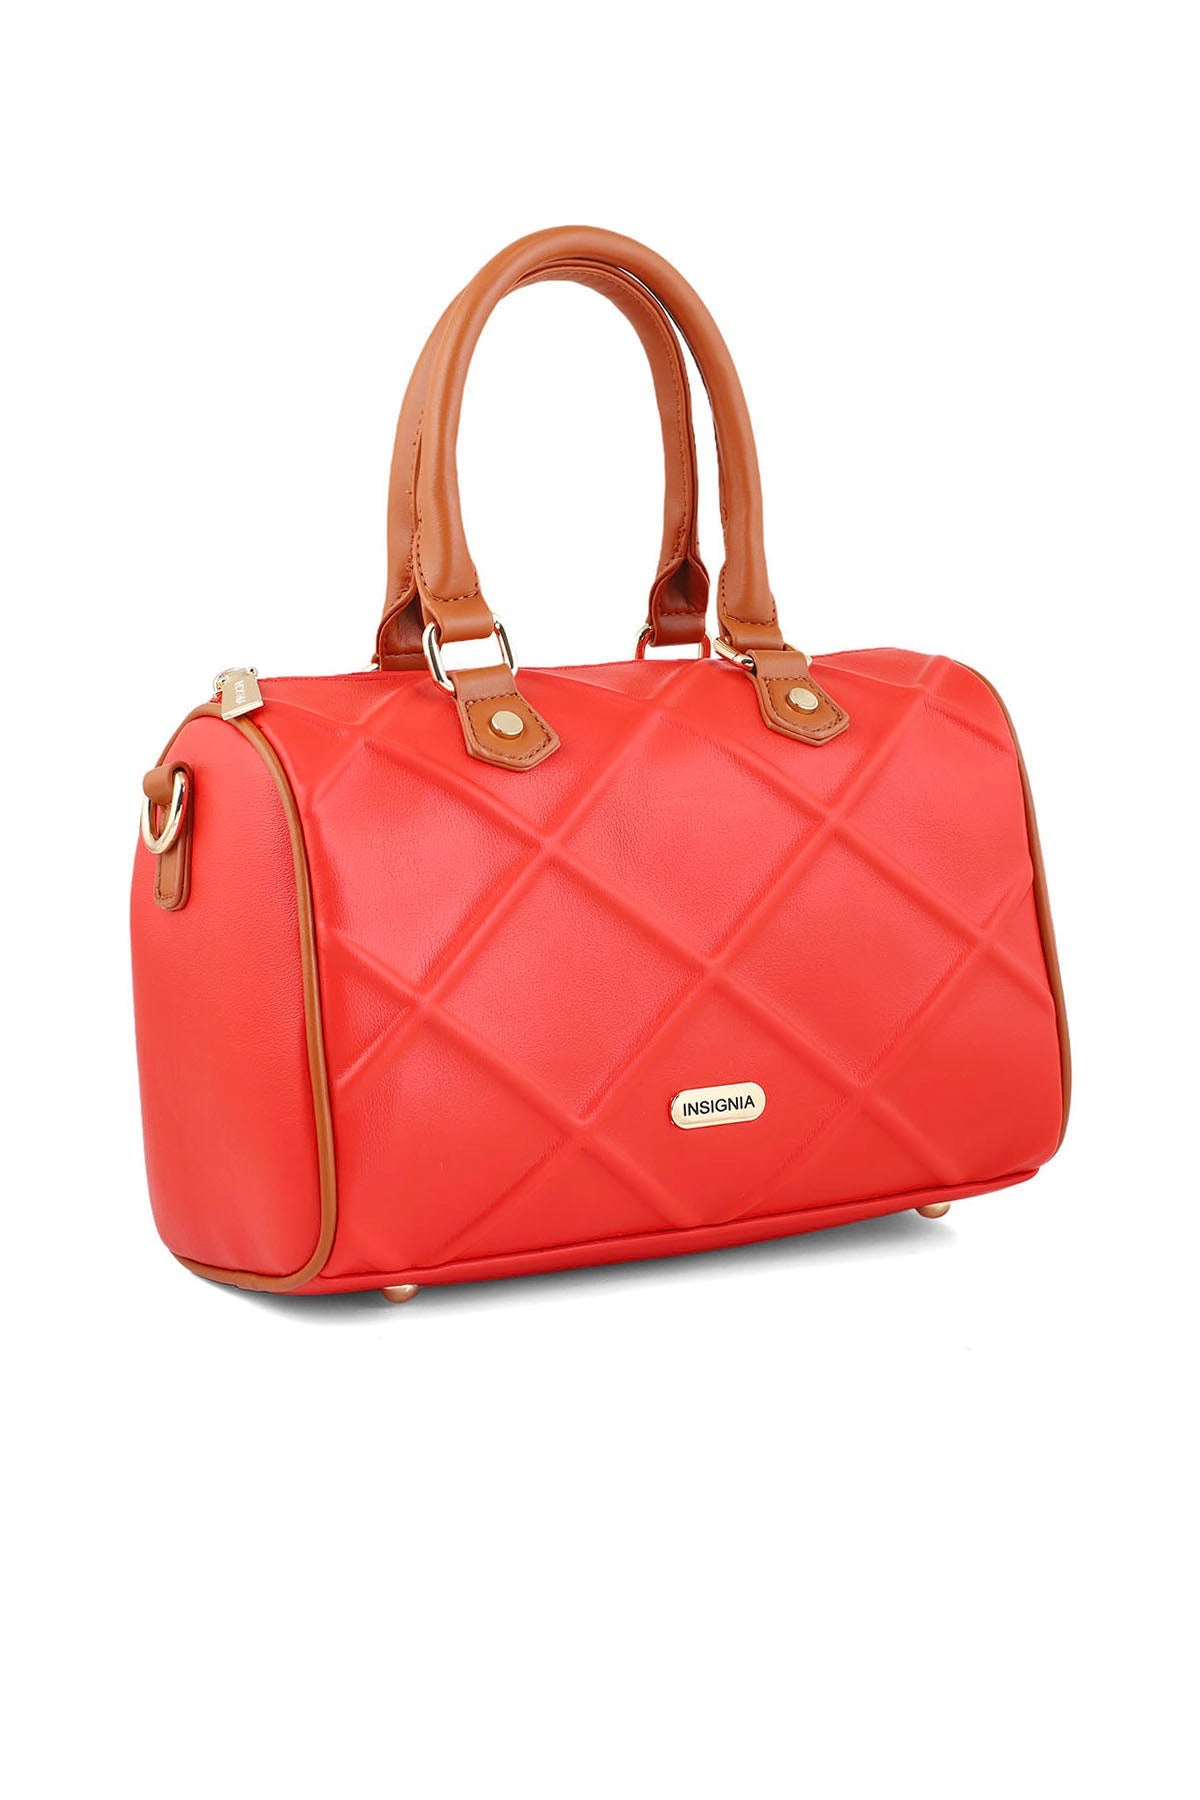 Top Handle Hand Bags B15041-Red